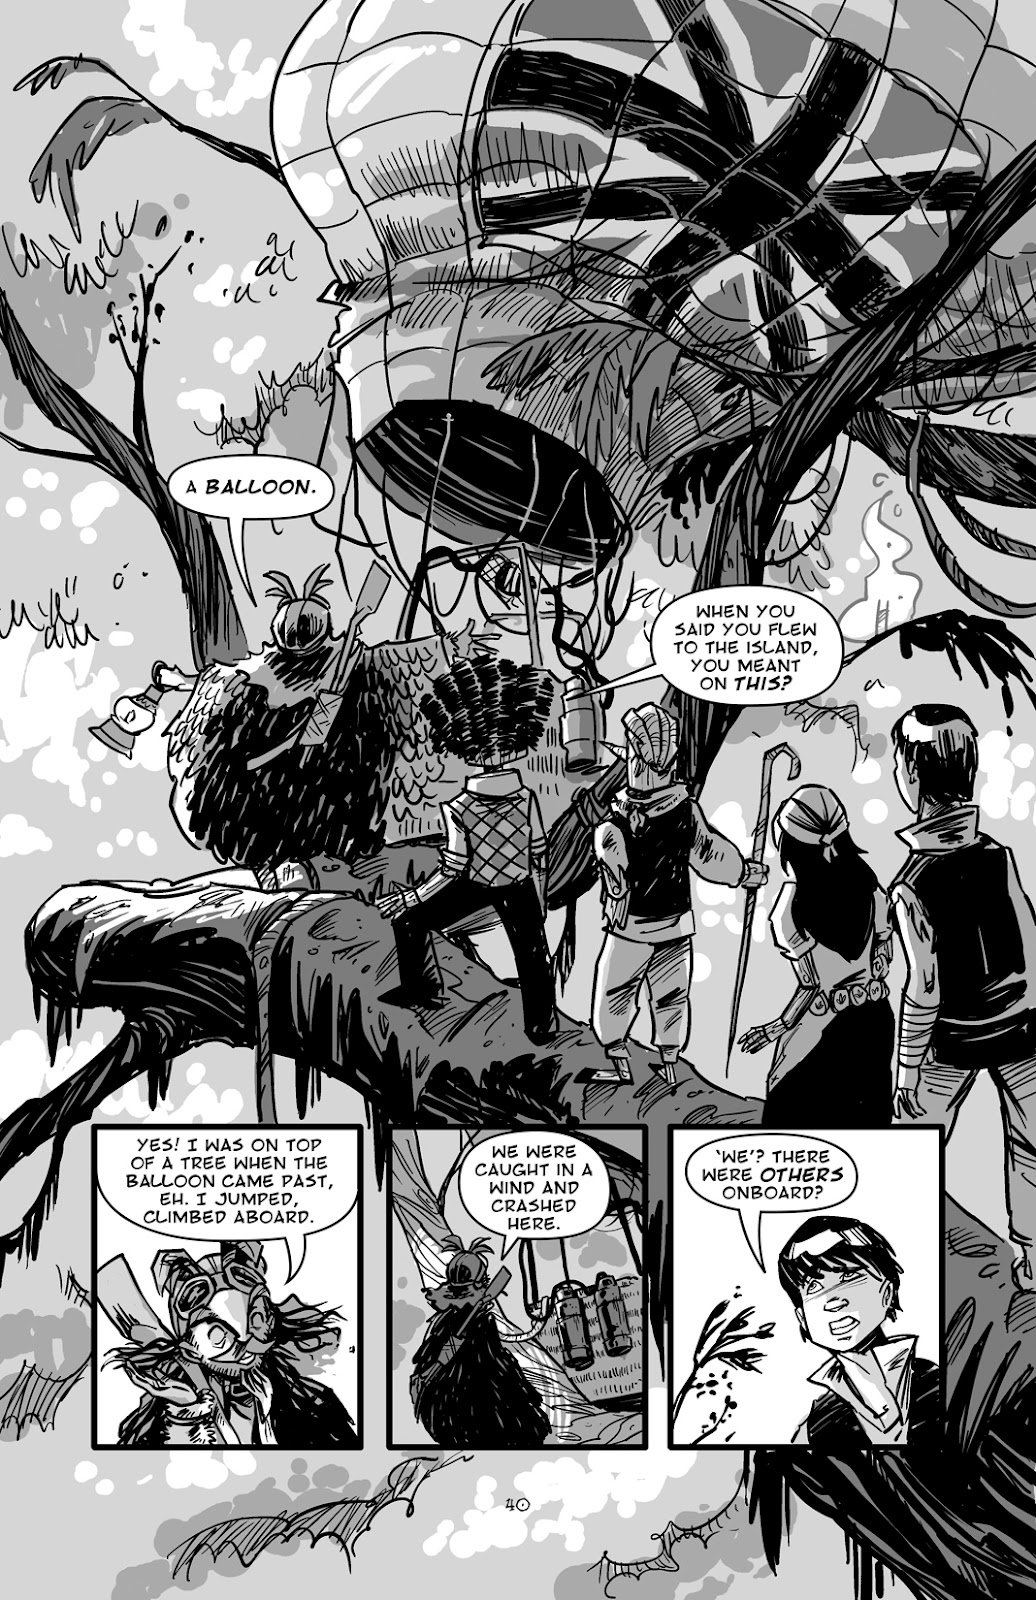 Pinocchio: Vampire Slayer - Of Wood and Blood issue 2 - Page 14